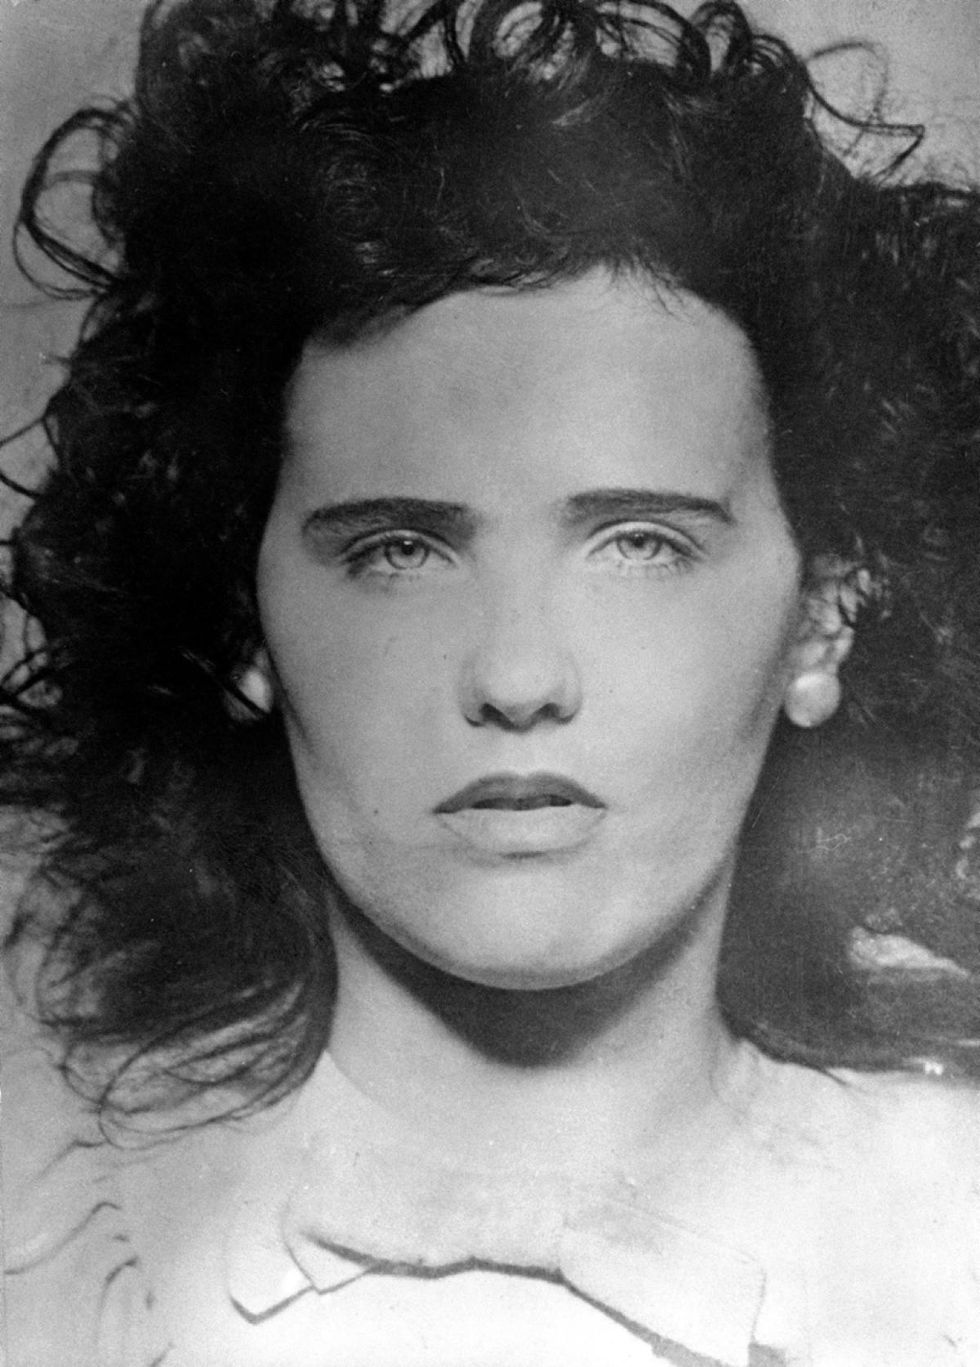 What Happened to the Black Dahlia?